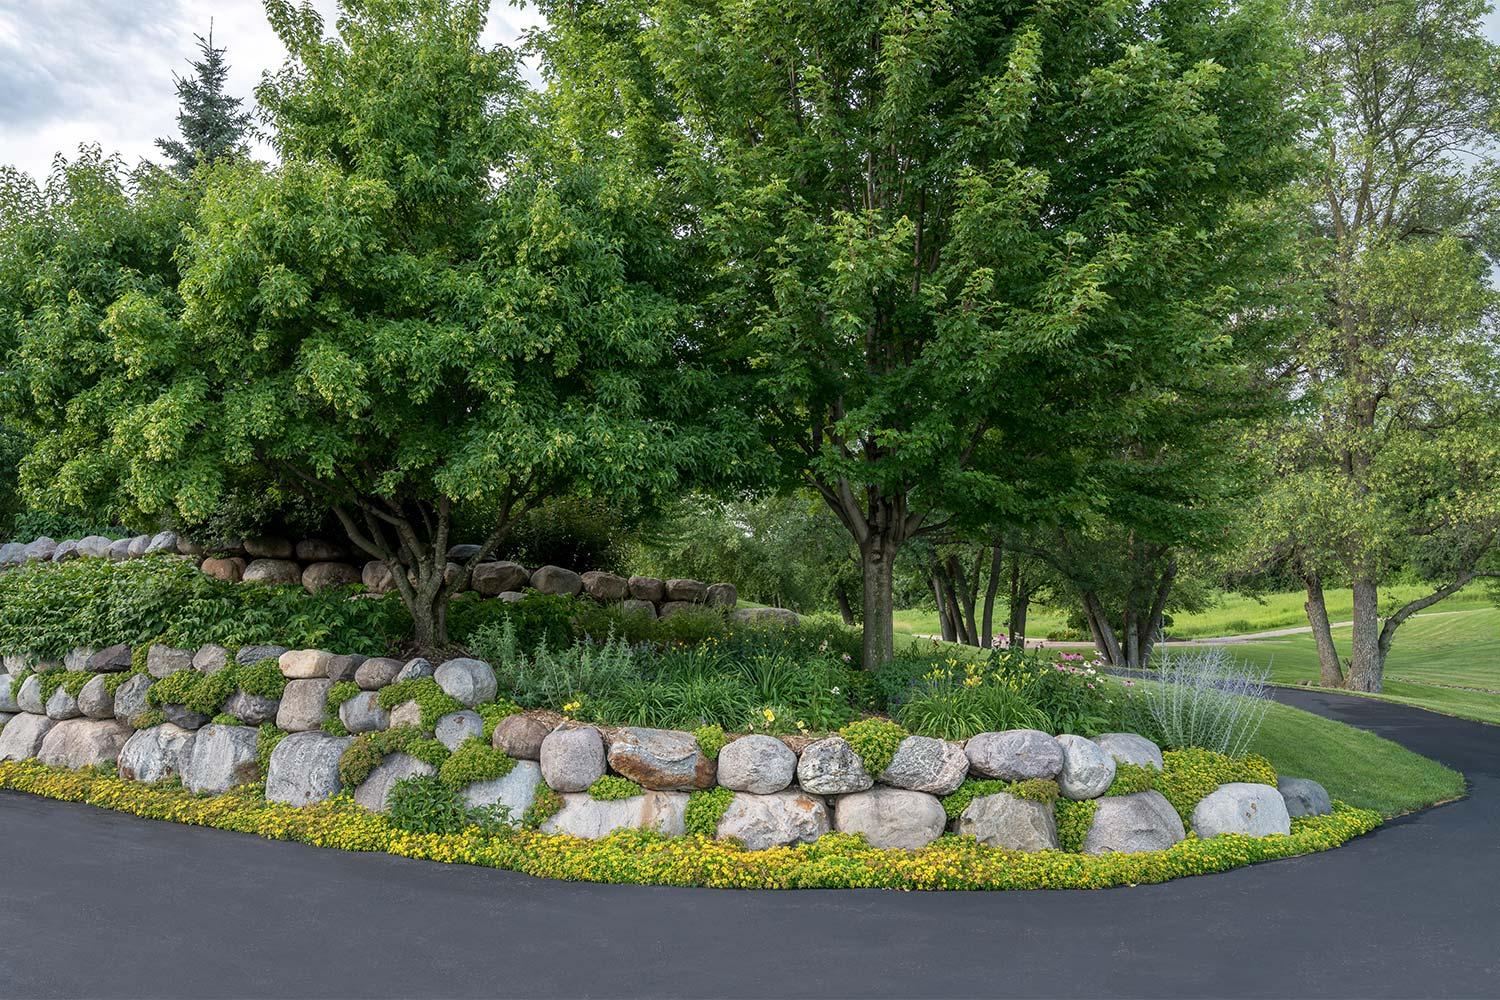 yellow flowers spilling over boulder retaining wall with green gardens and trees in an island garden surrounded by a driveway.